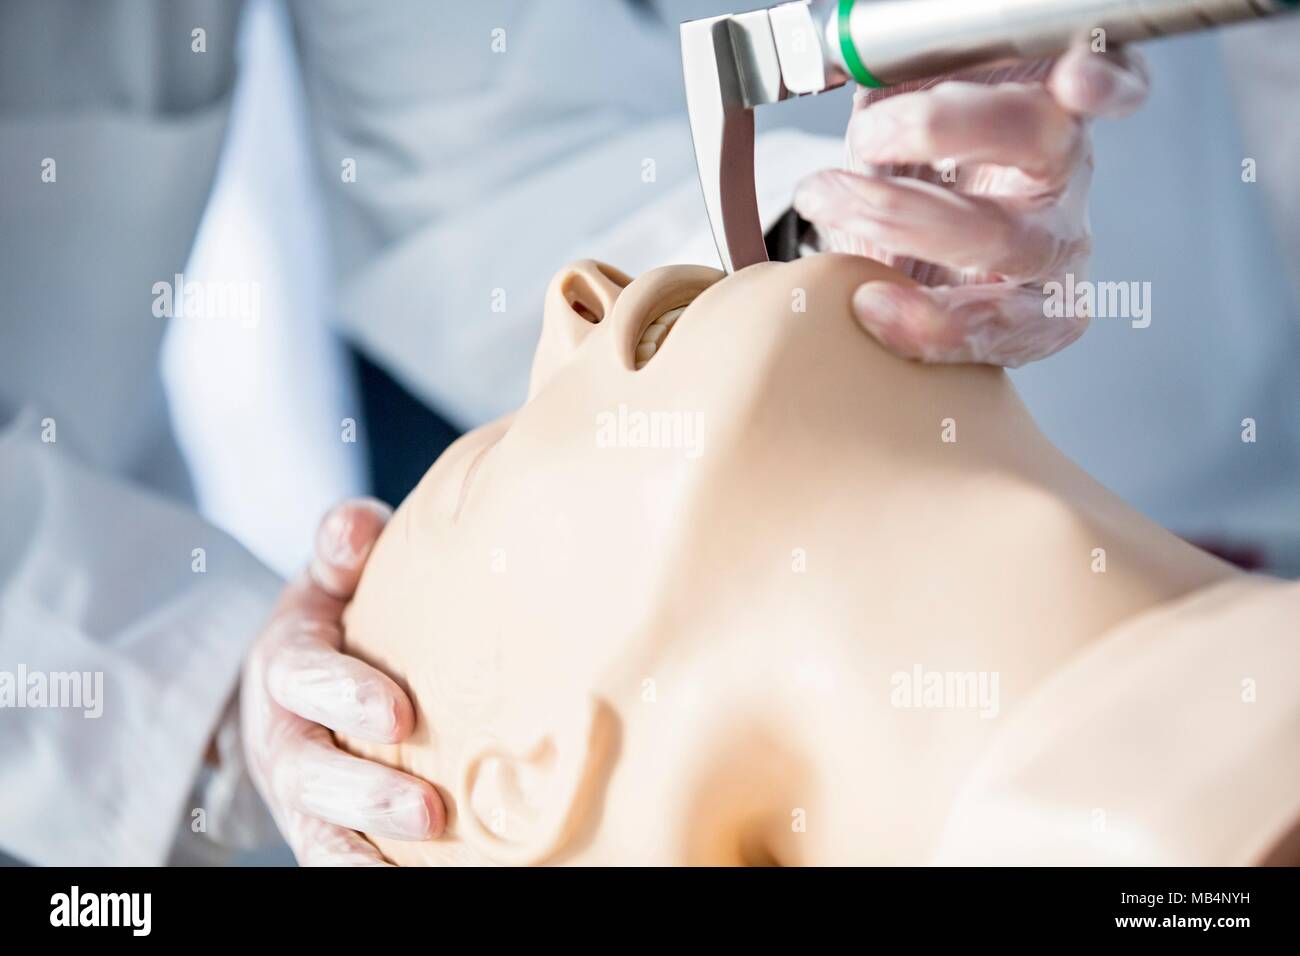 Doctor practising tracheal intubation on a training dummy. Stock Photo